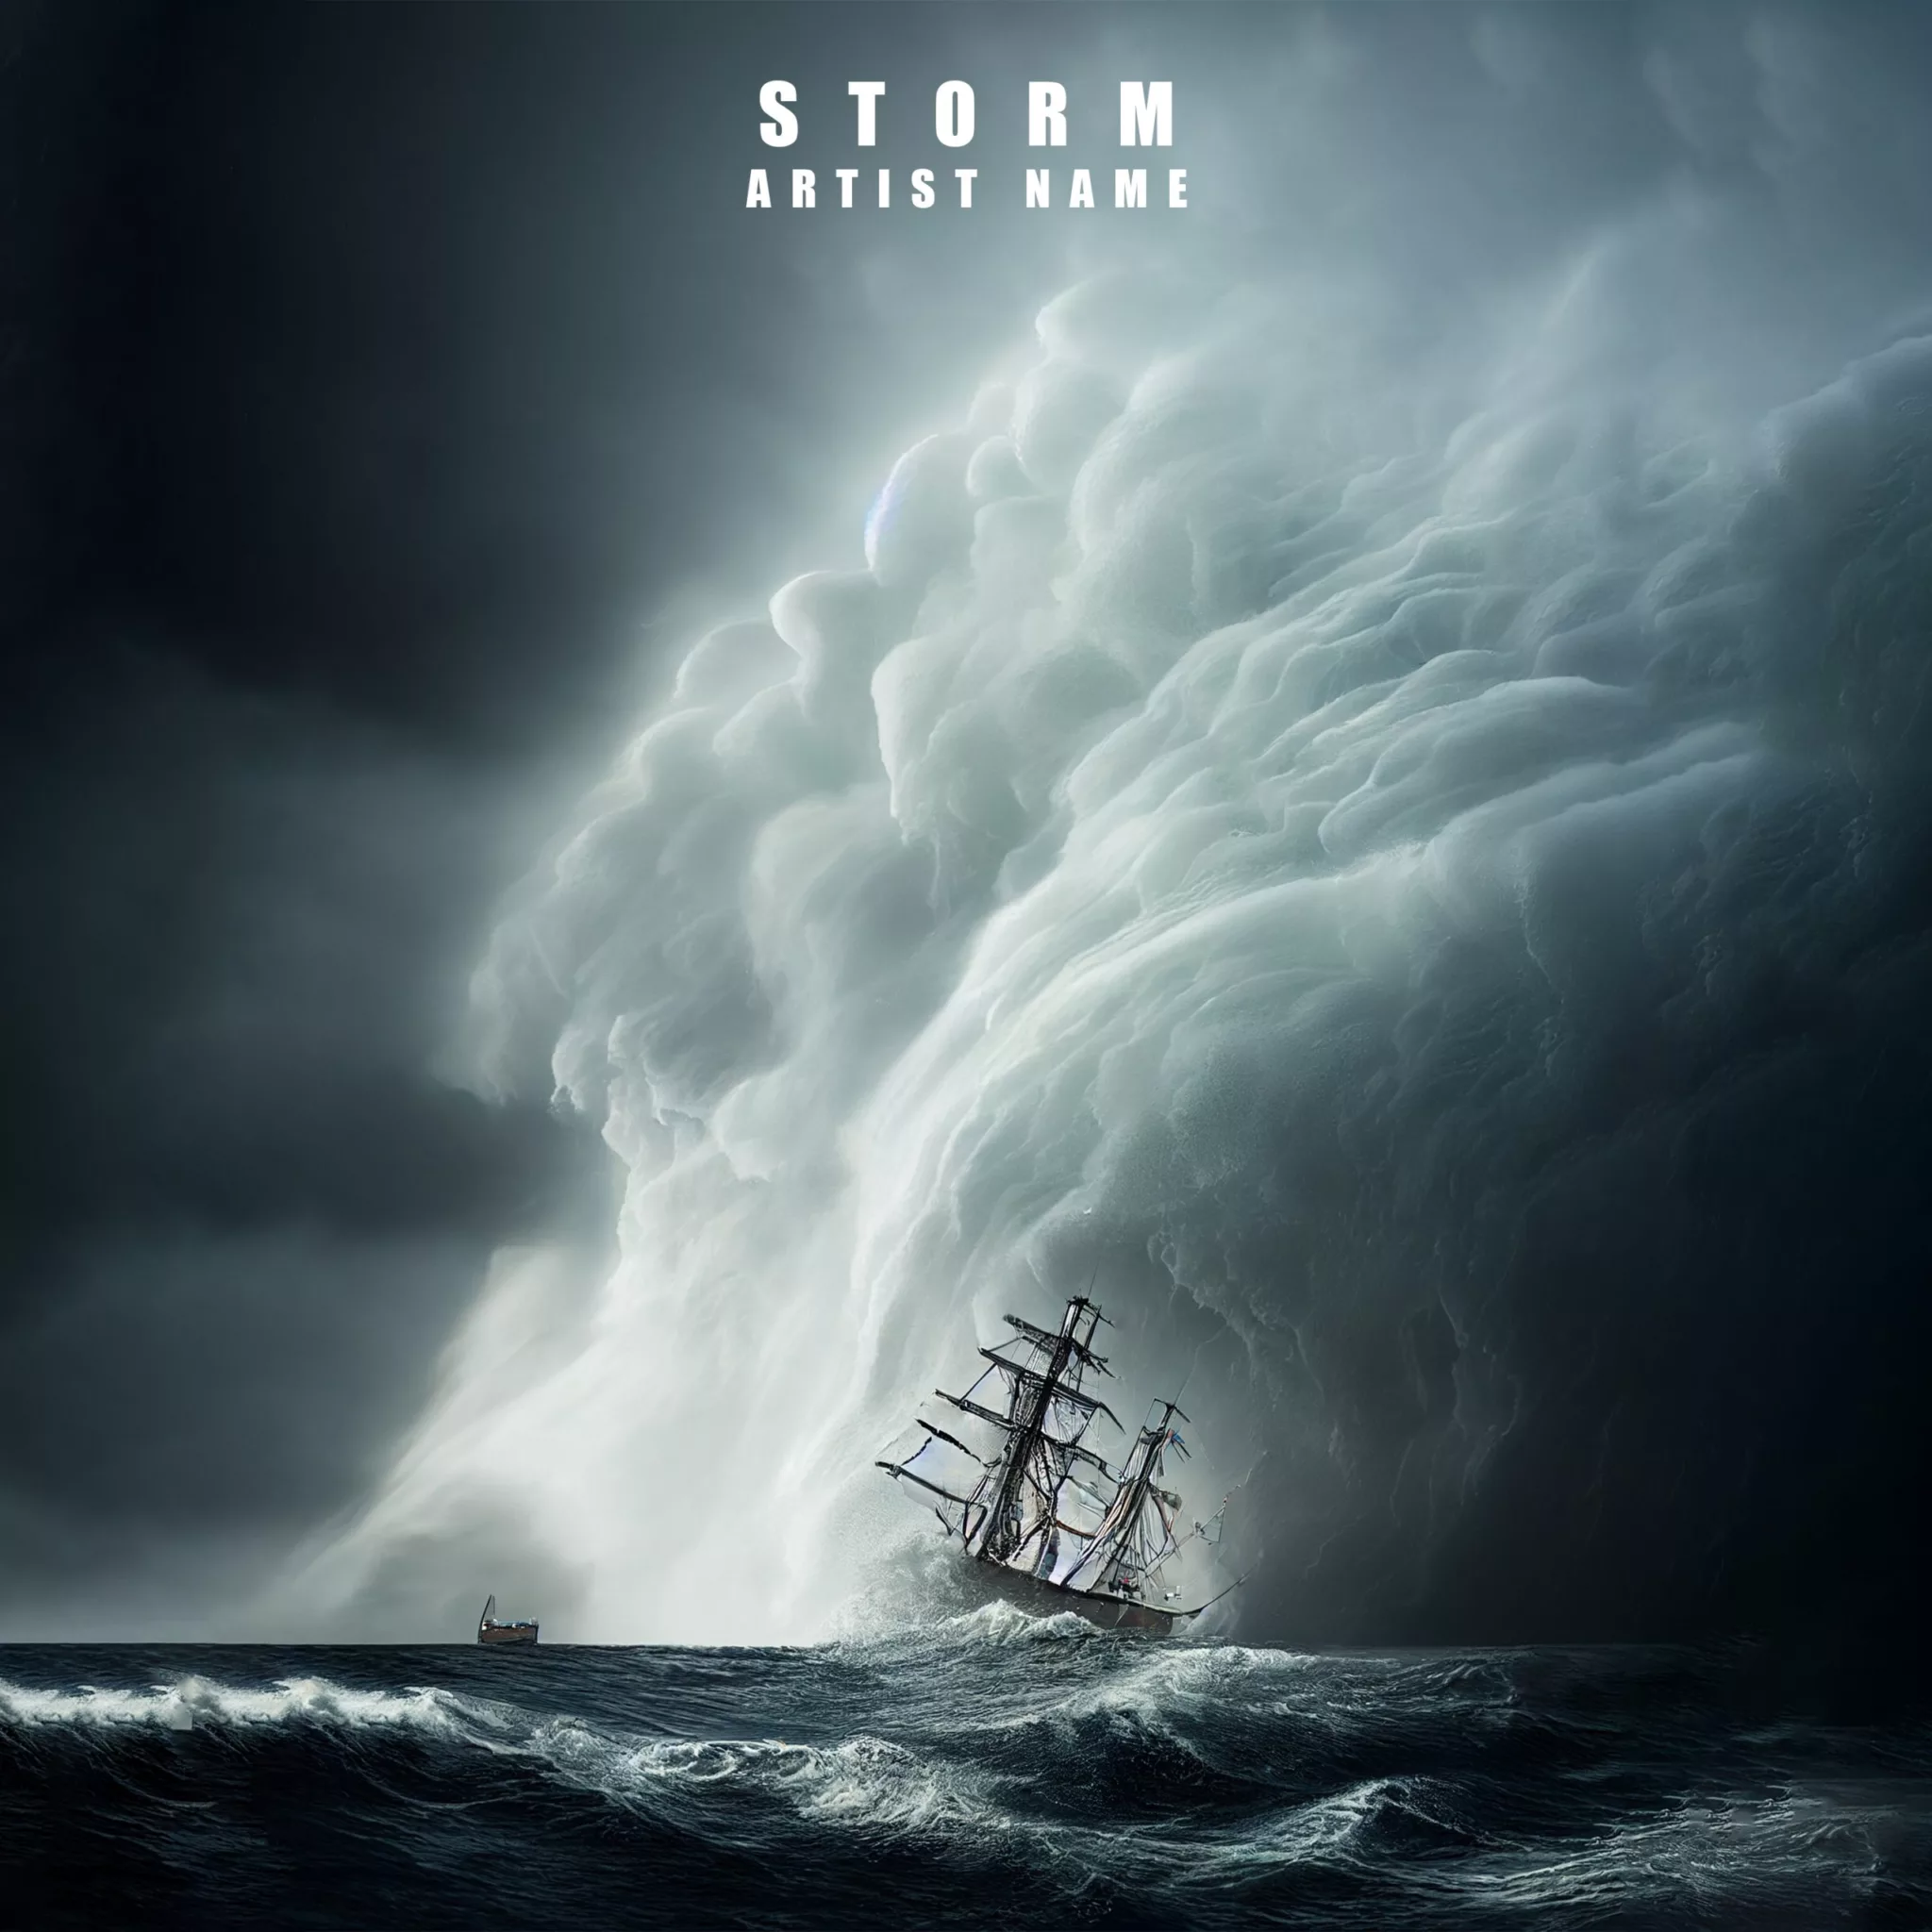 Storm cover art for sale